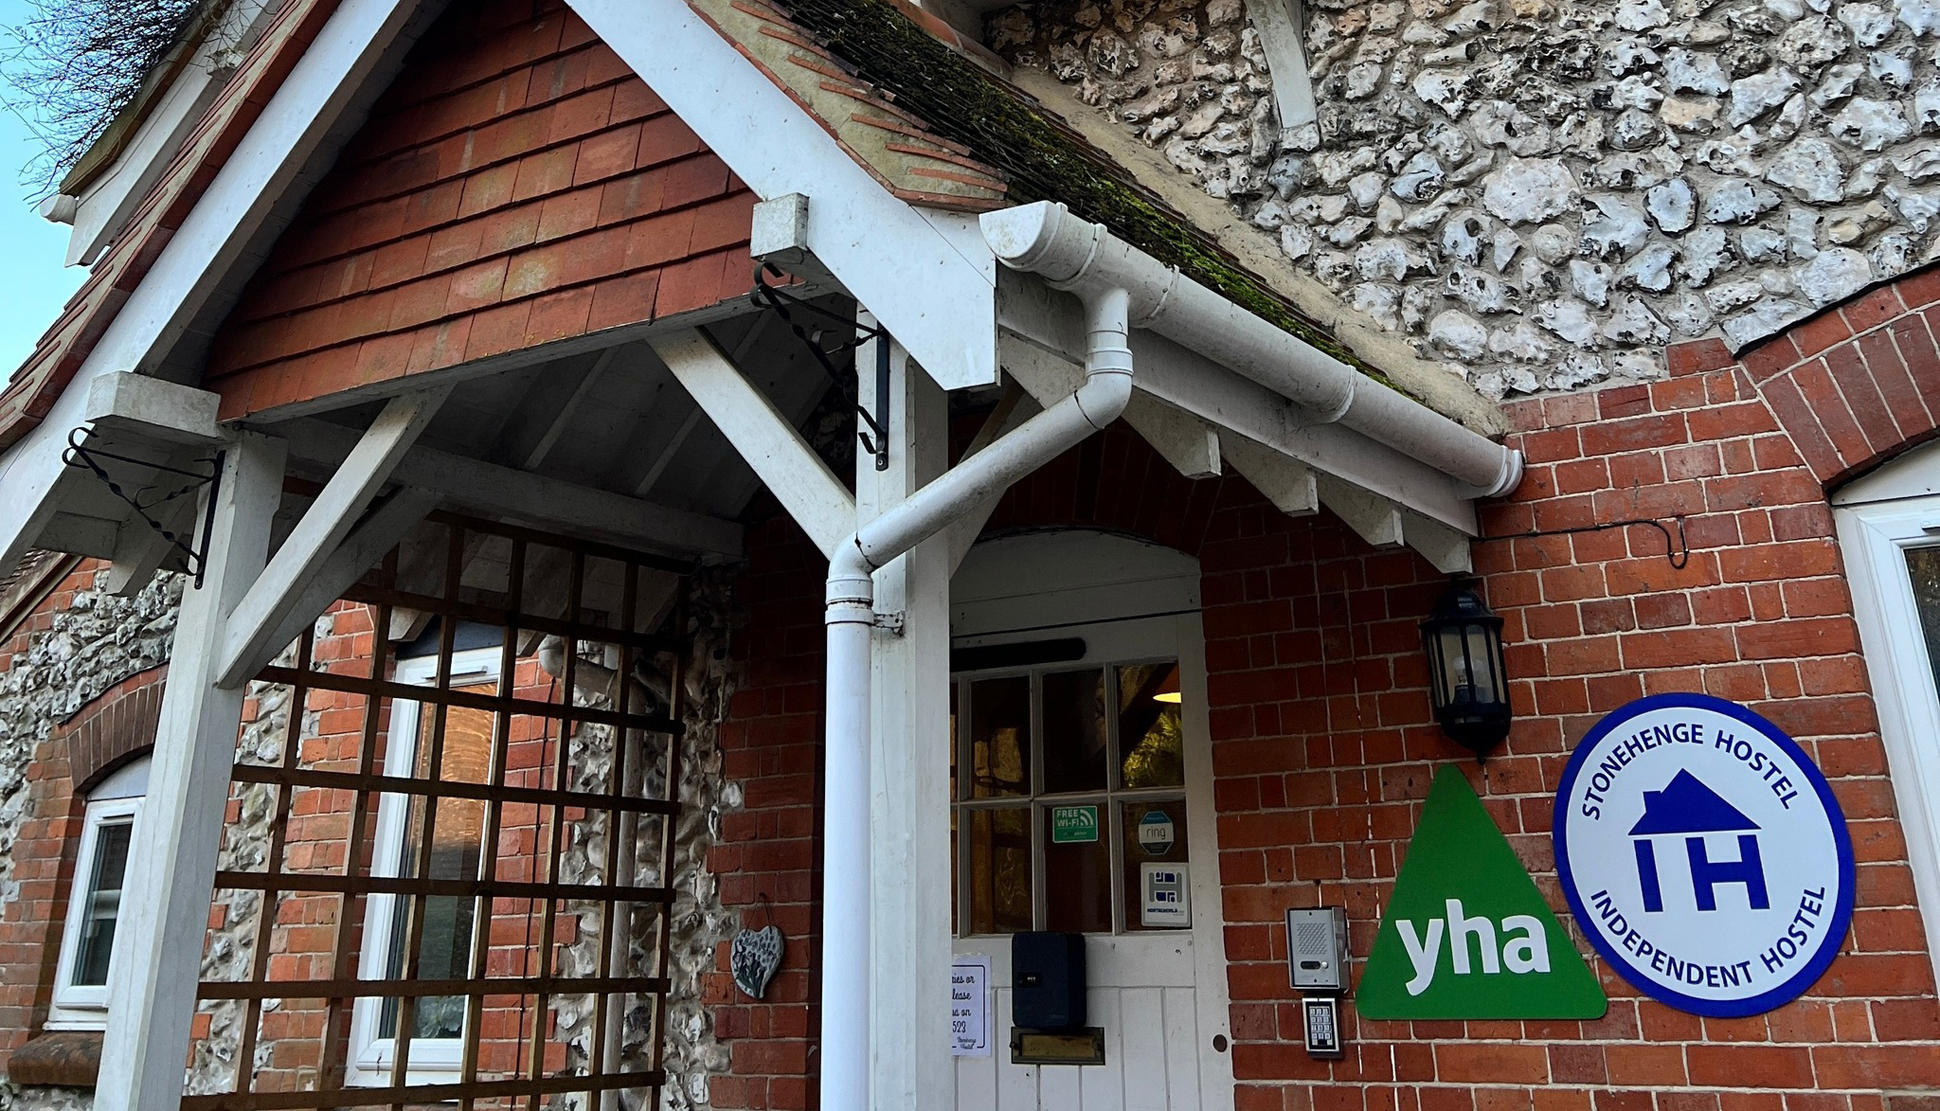 Do you want to know about the YHA’s sold hostels?